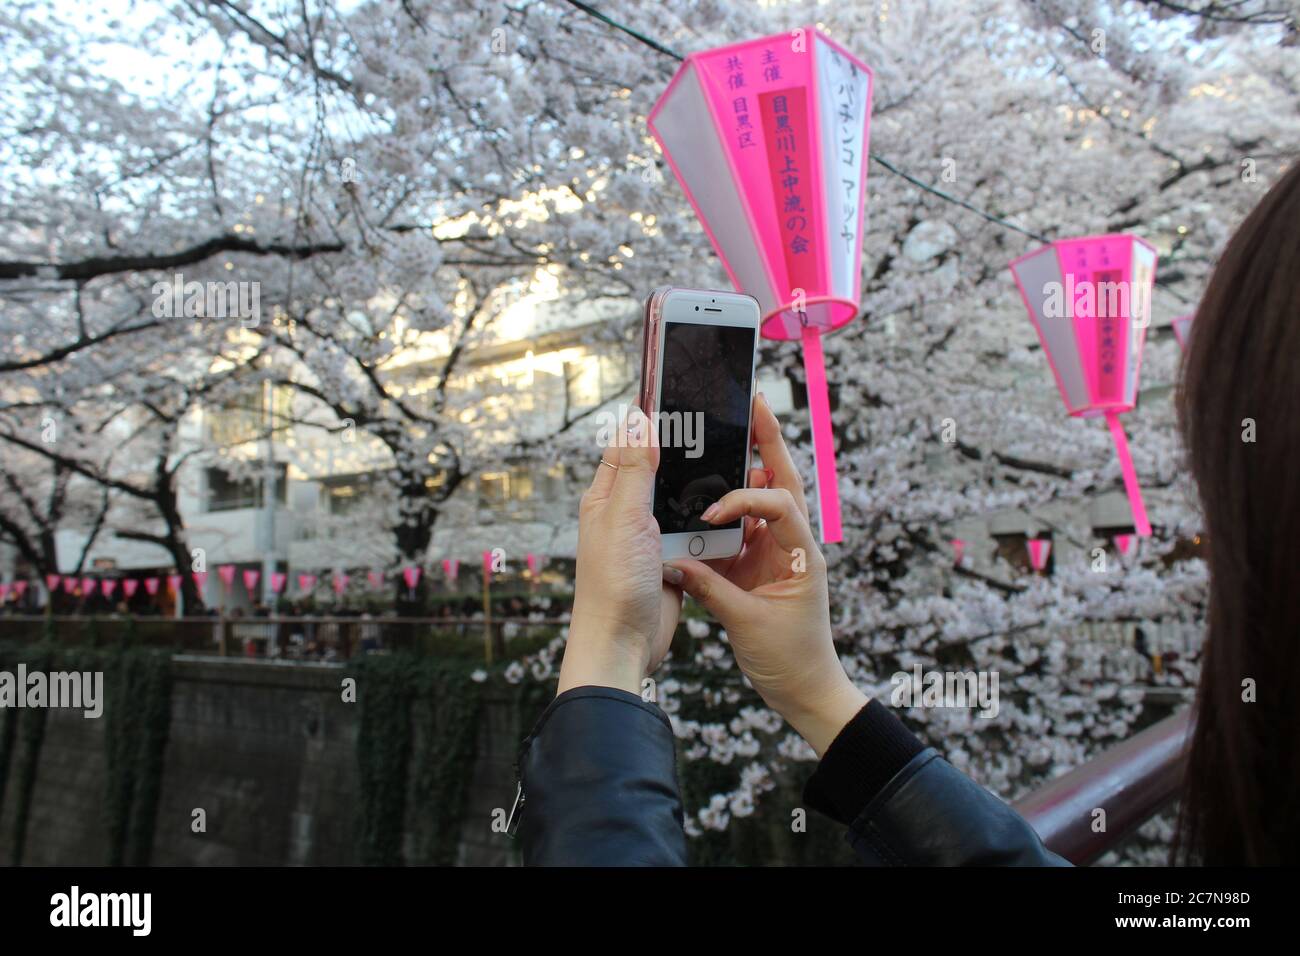 Tokyo, Japan - 25 March 2018: Japanese woman takes photo of cherry blossoms with her mobile phone. Stock Photo